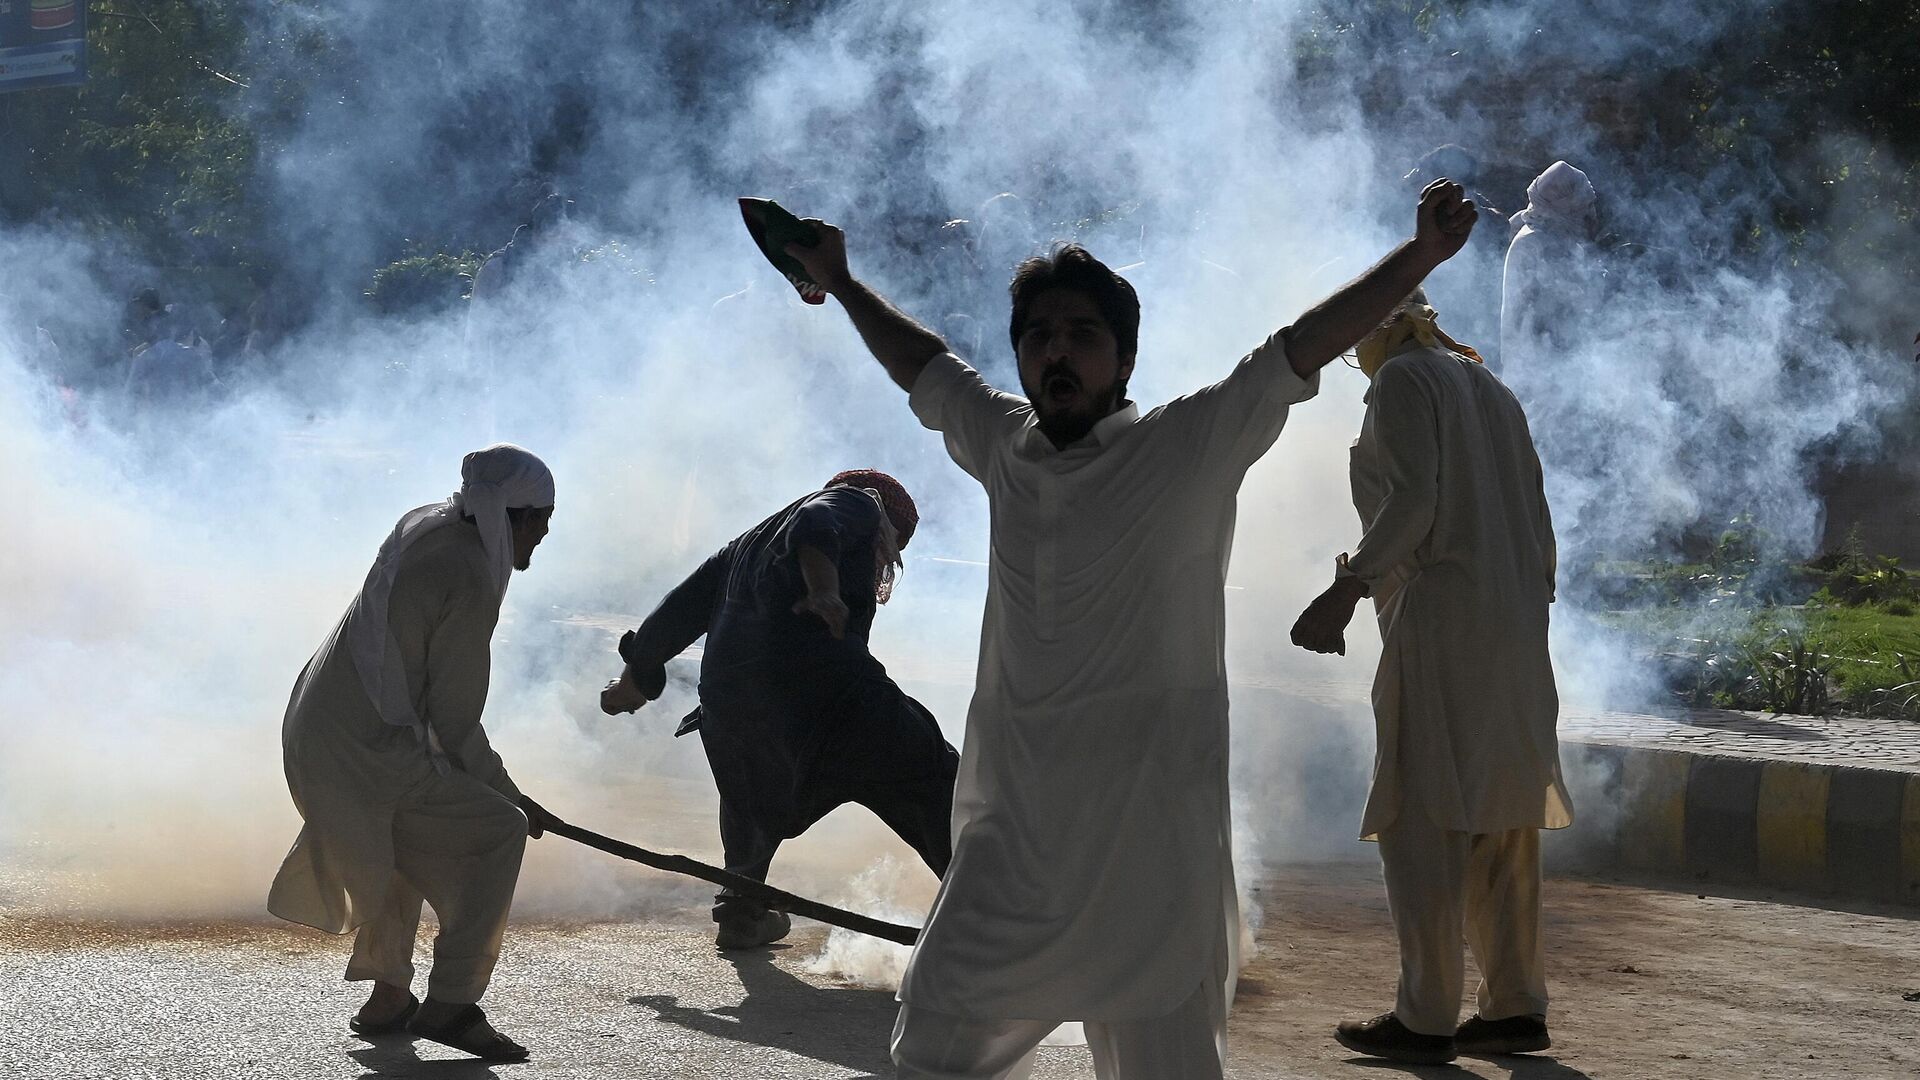 Pakistan Tehreek-e-Insaf (PTI) party activists and supporters of former Pakistan's Prime Minister Imran clash with police amid teargas during a protest against the arrest of their leader, in Peshawar on May 9, 2023. - Sputnik India, 1920, 09.05.2023